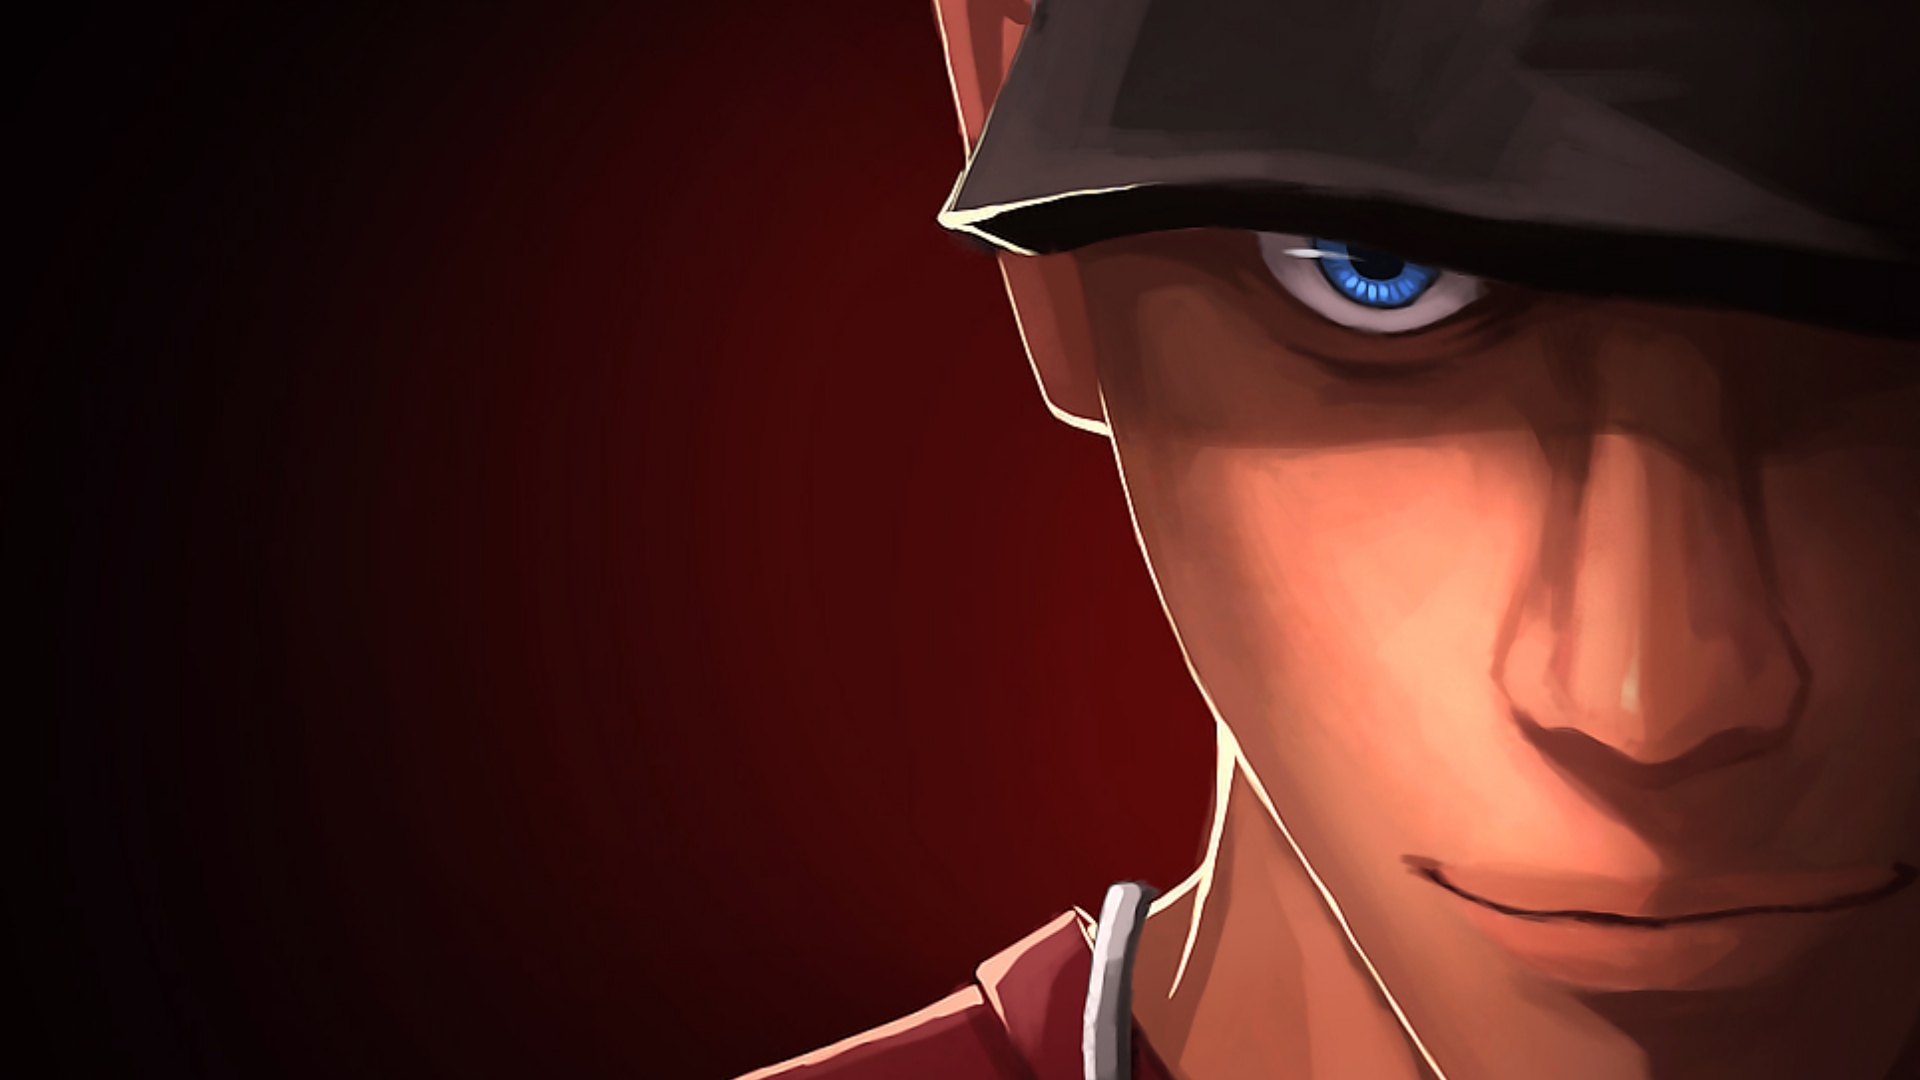 Tf2 avatars for steam фото 10